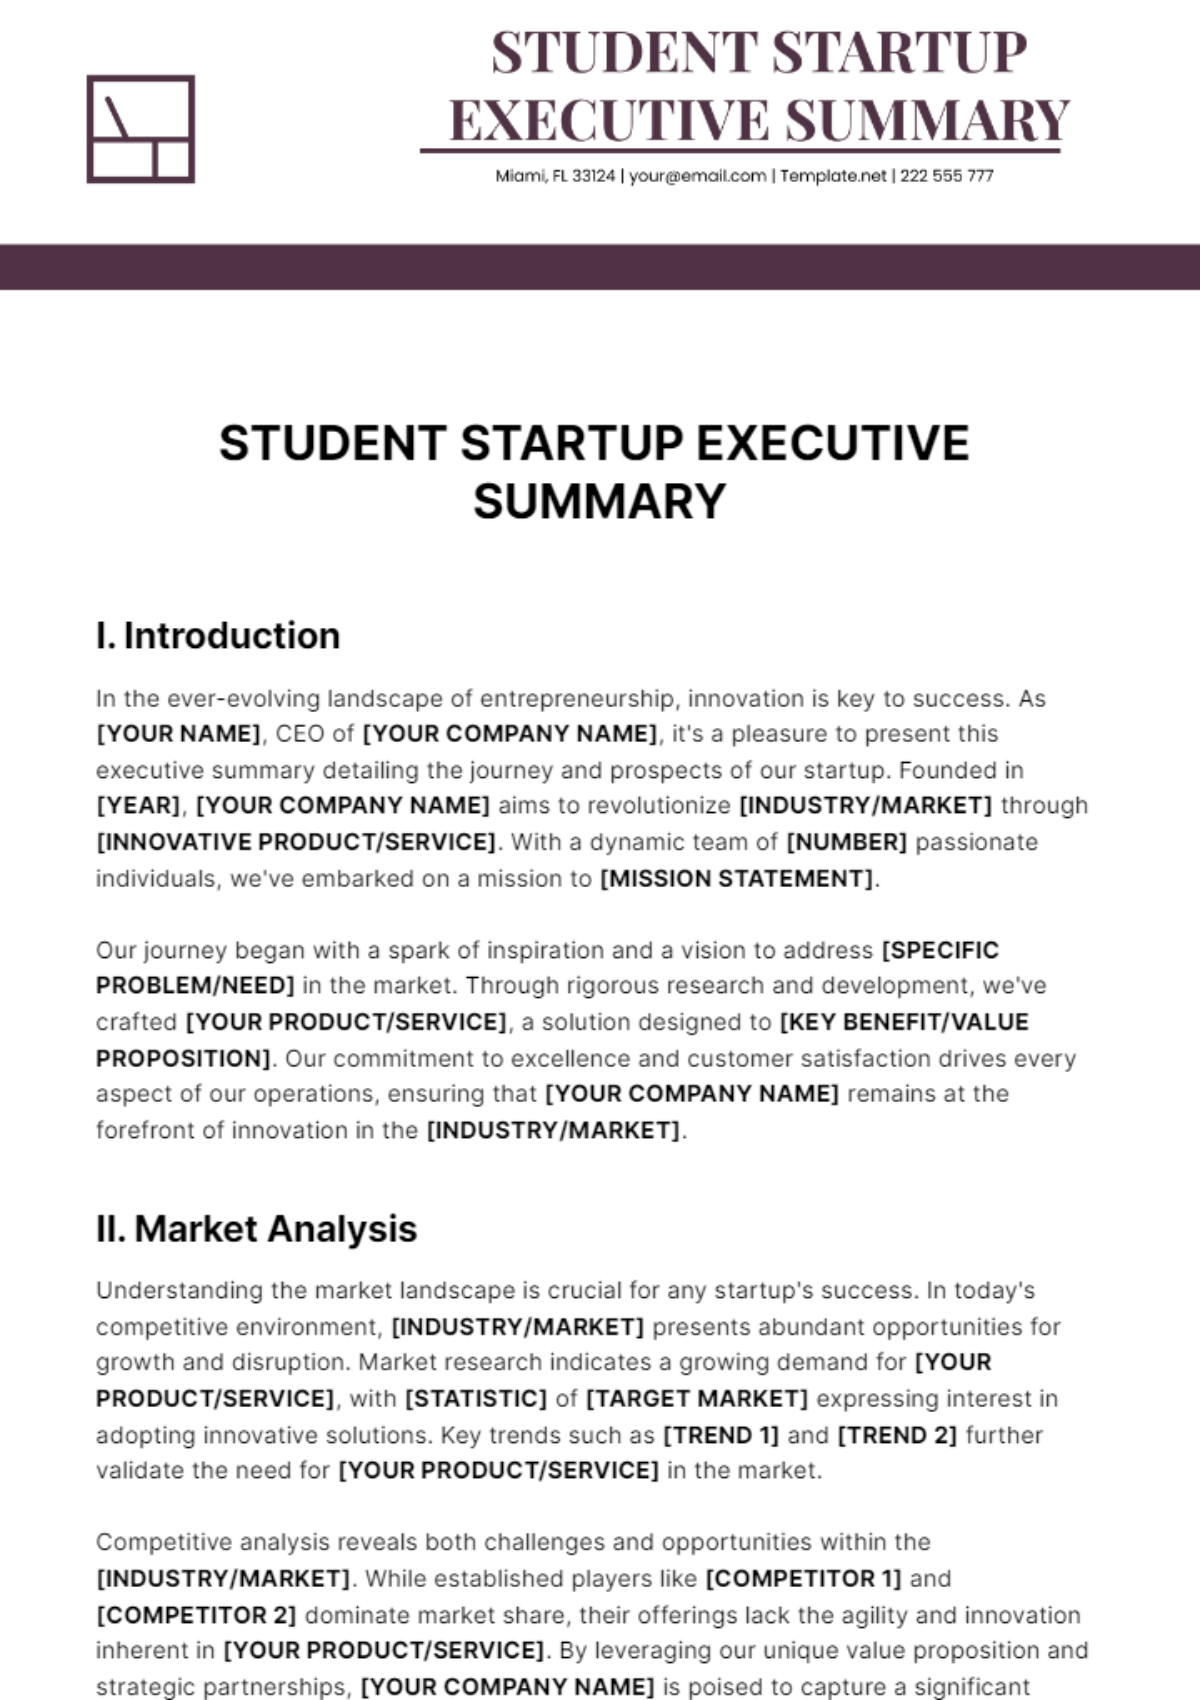 Student Startup Executive Summary Template